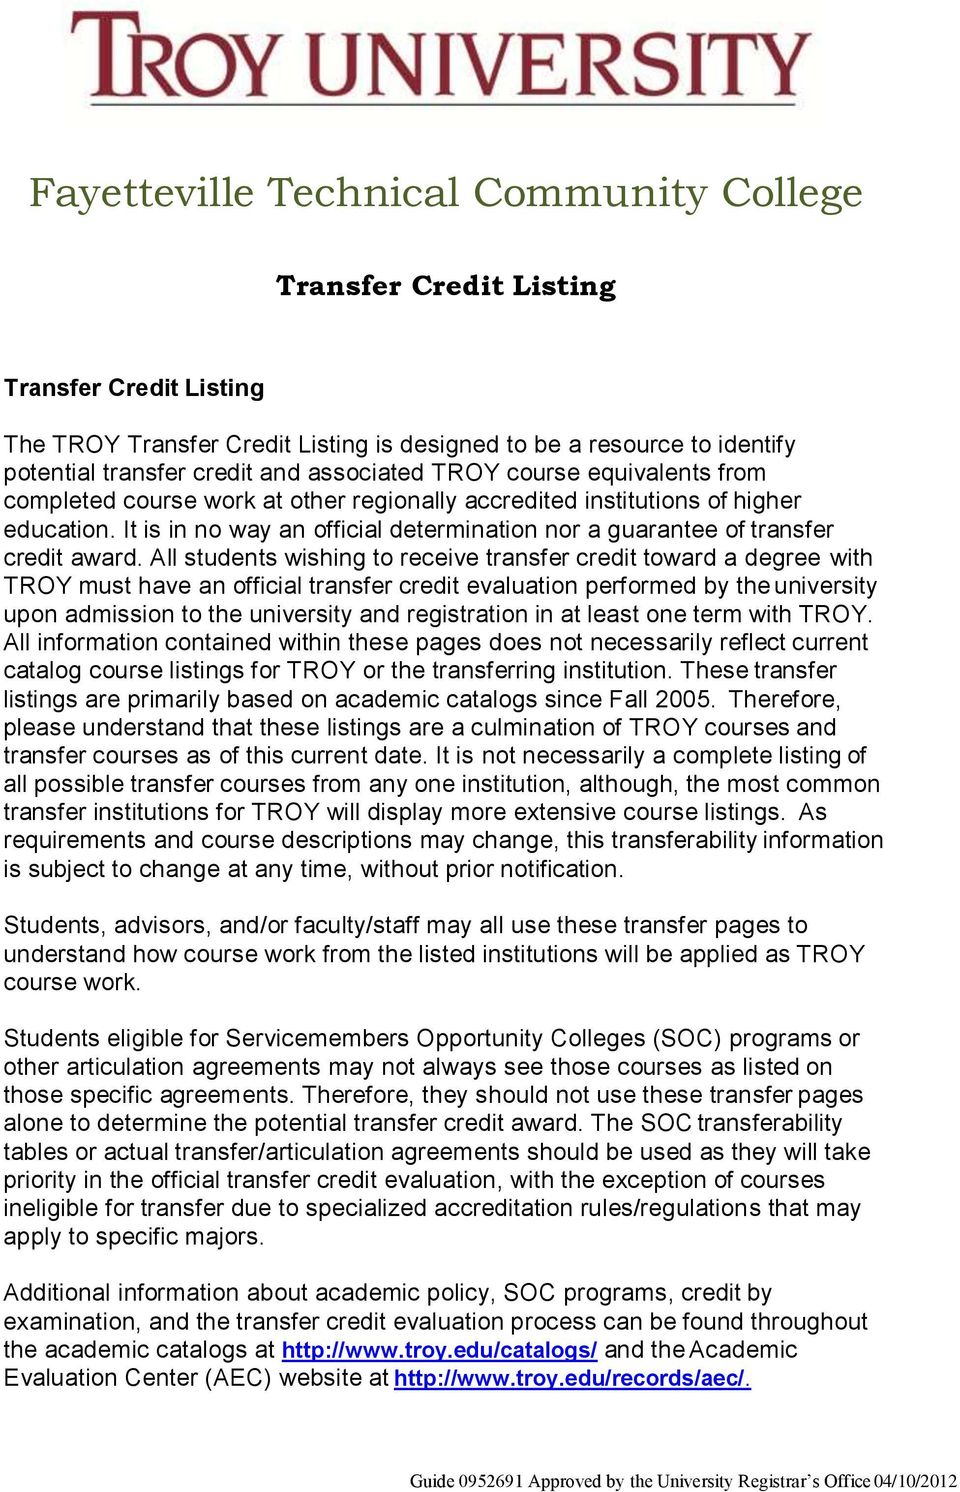 All students wishing to receive transfer credit toward a degree with TROY must have an official transfer credit evaluation performed by the university upon admission to the university and